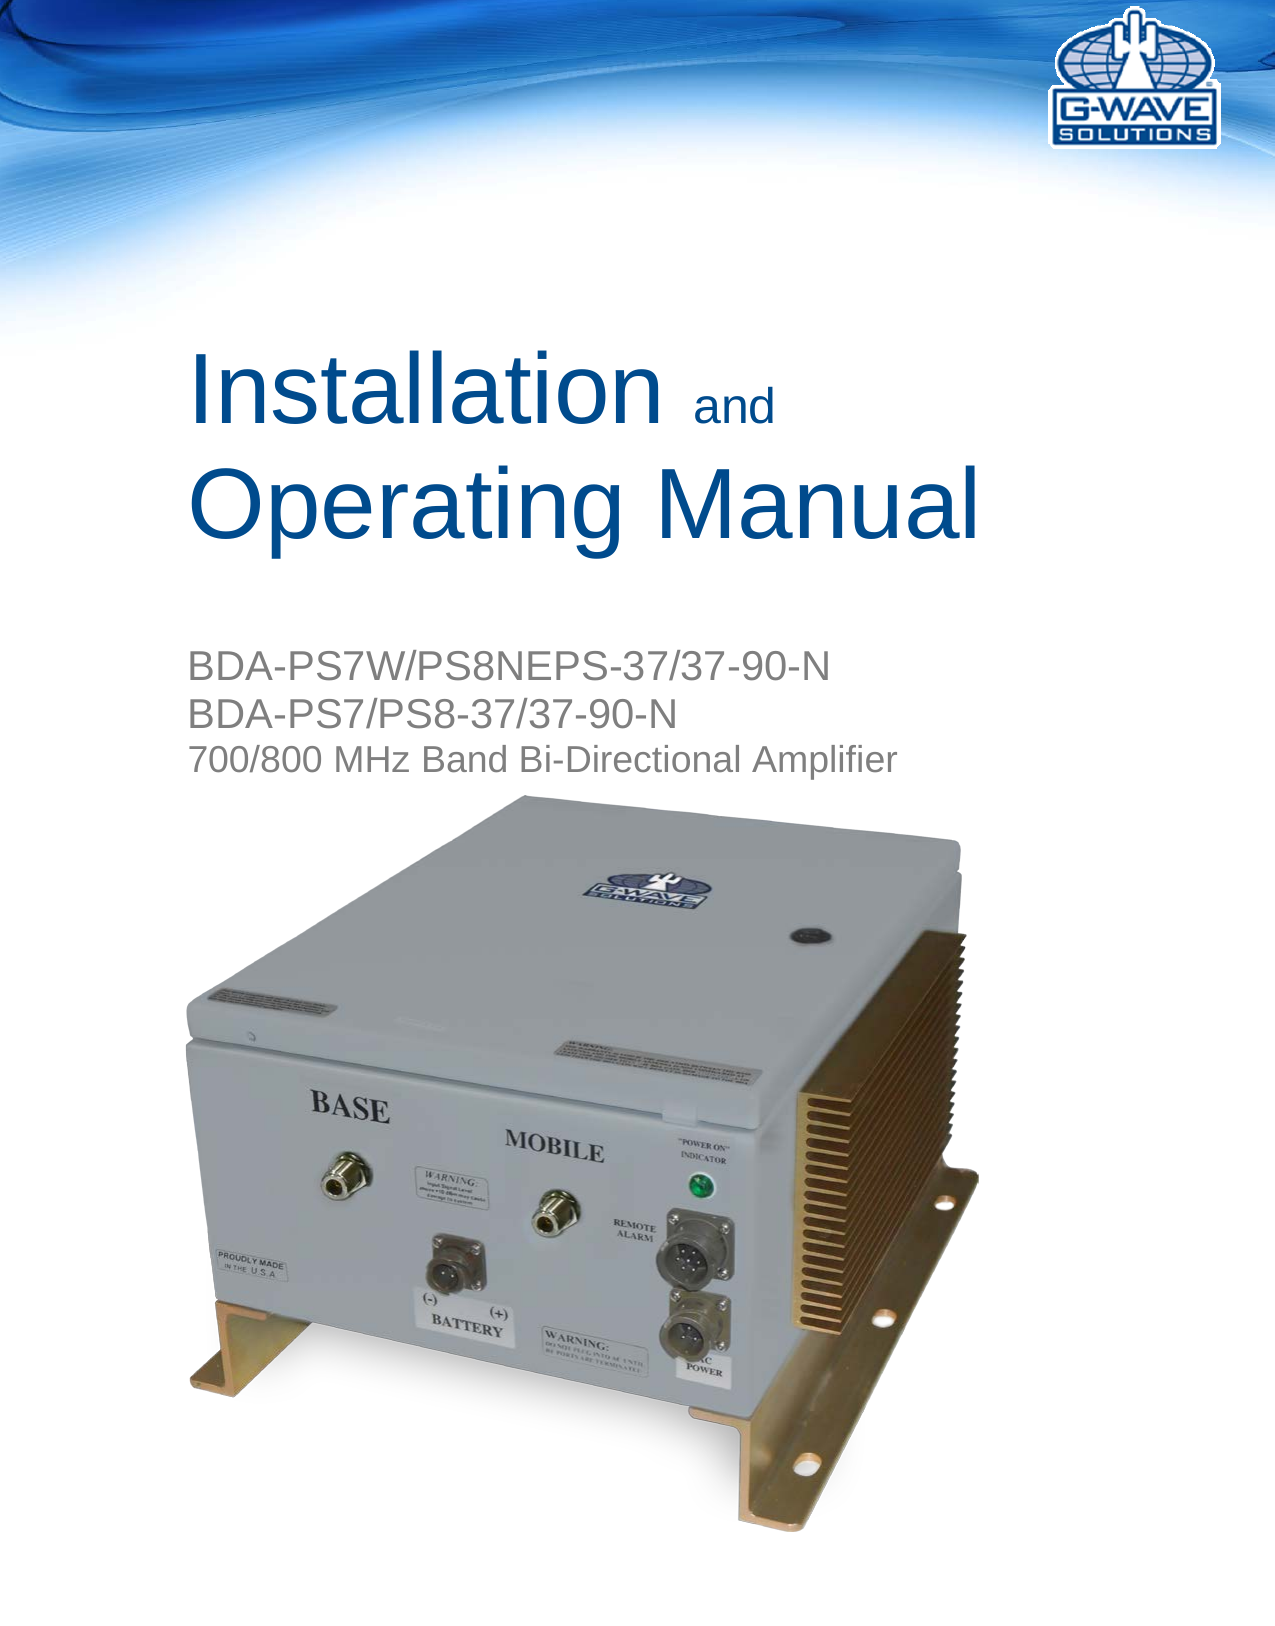       Installation and Operating Manual    BDA-PS7W/PS8NEPS-37/37-90-N BDA-PS7/PS8-37/37-90-N 700/800 MHz Band Bi-Directional Amplifier    